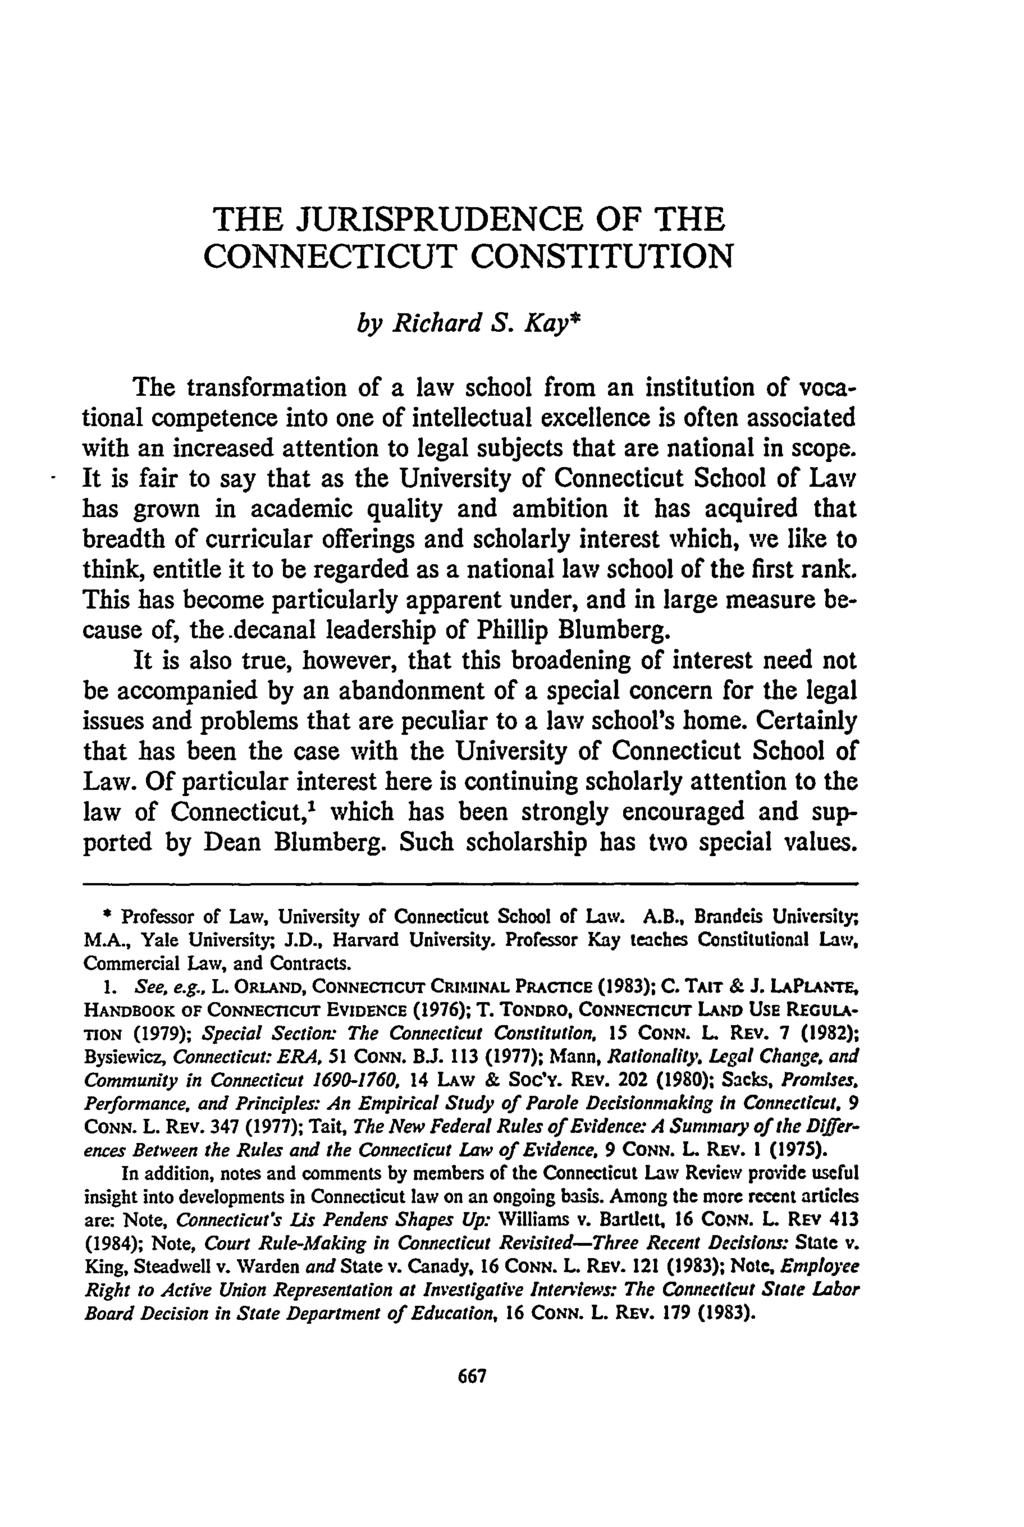 THE JURISPRUDENCE OF THE CONNECTICUT CONSTITUTION by Richard S.